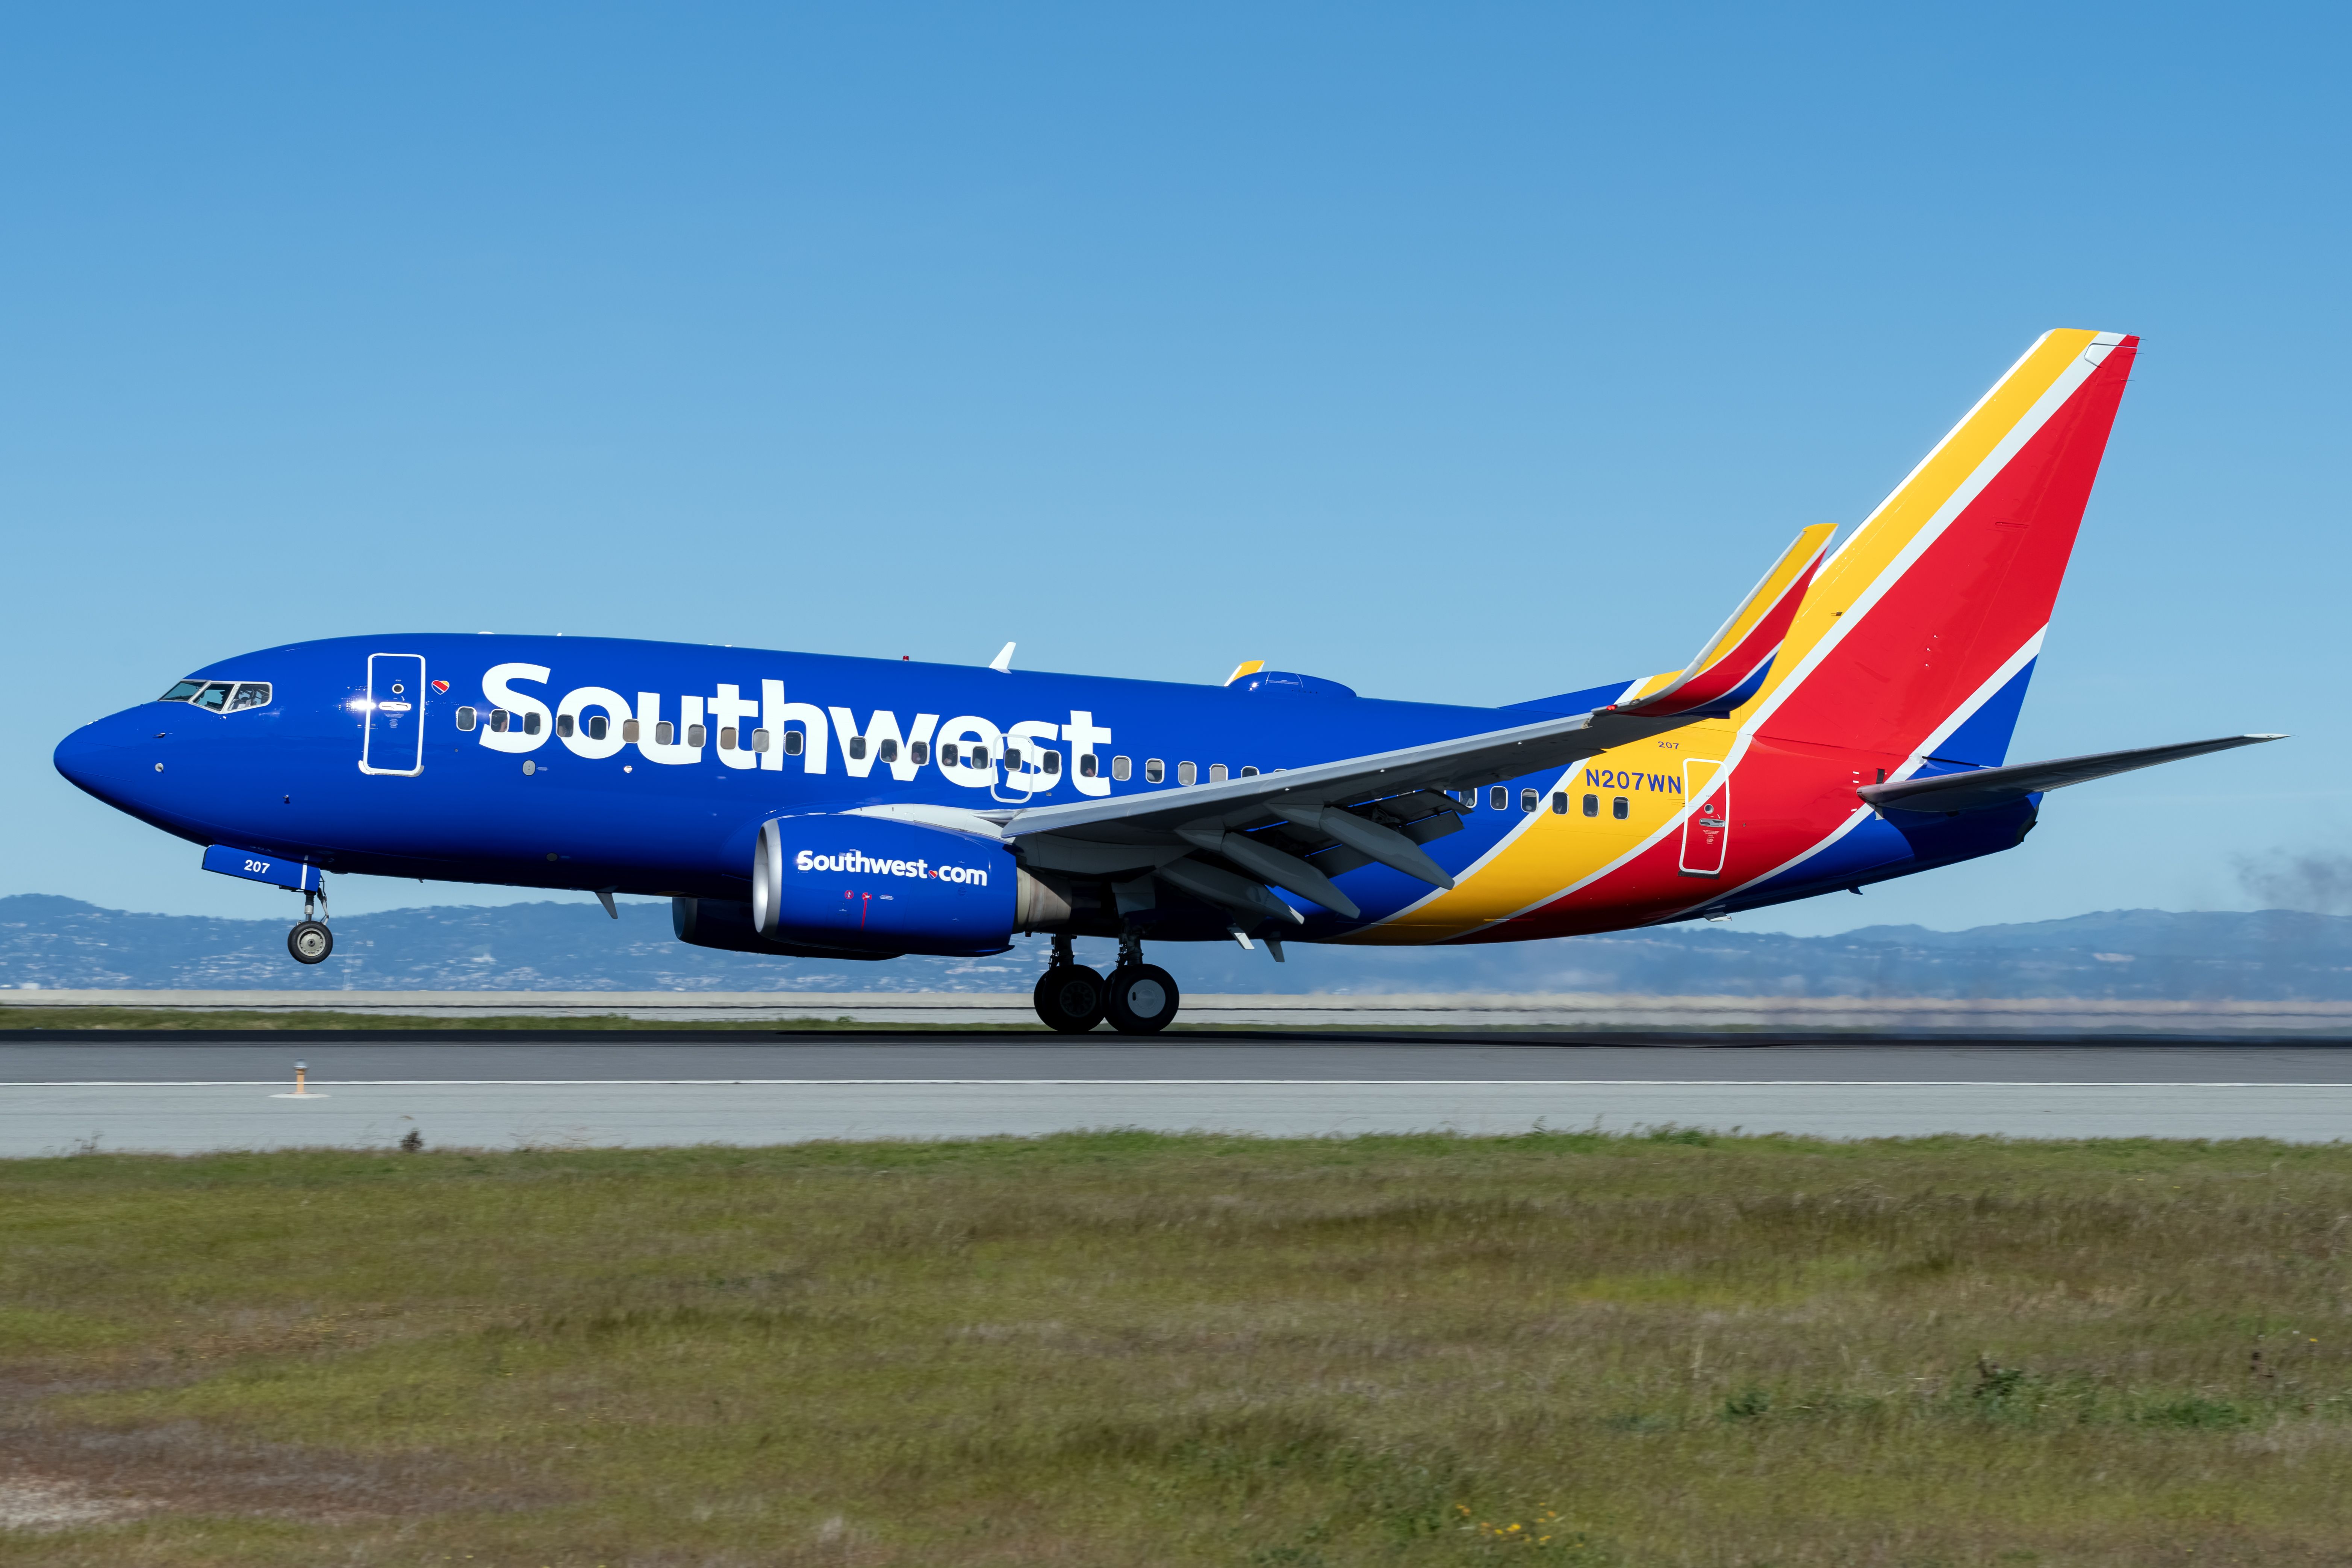 A Southwest Airlines Boeing 737-700 taking off.